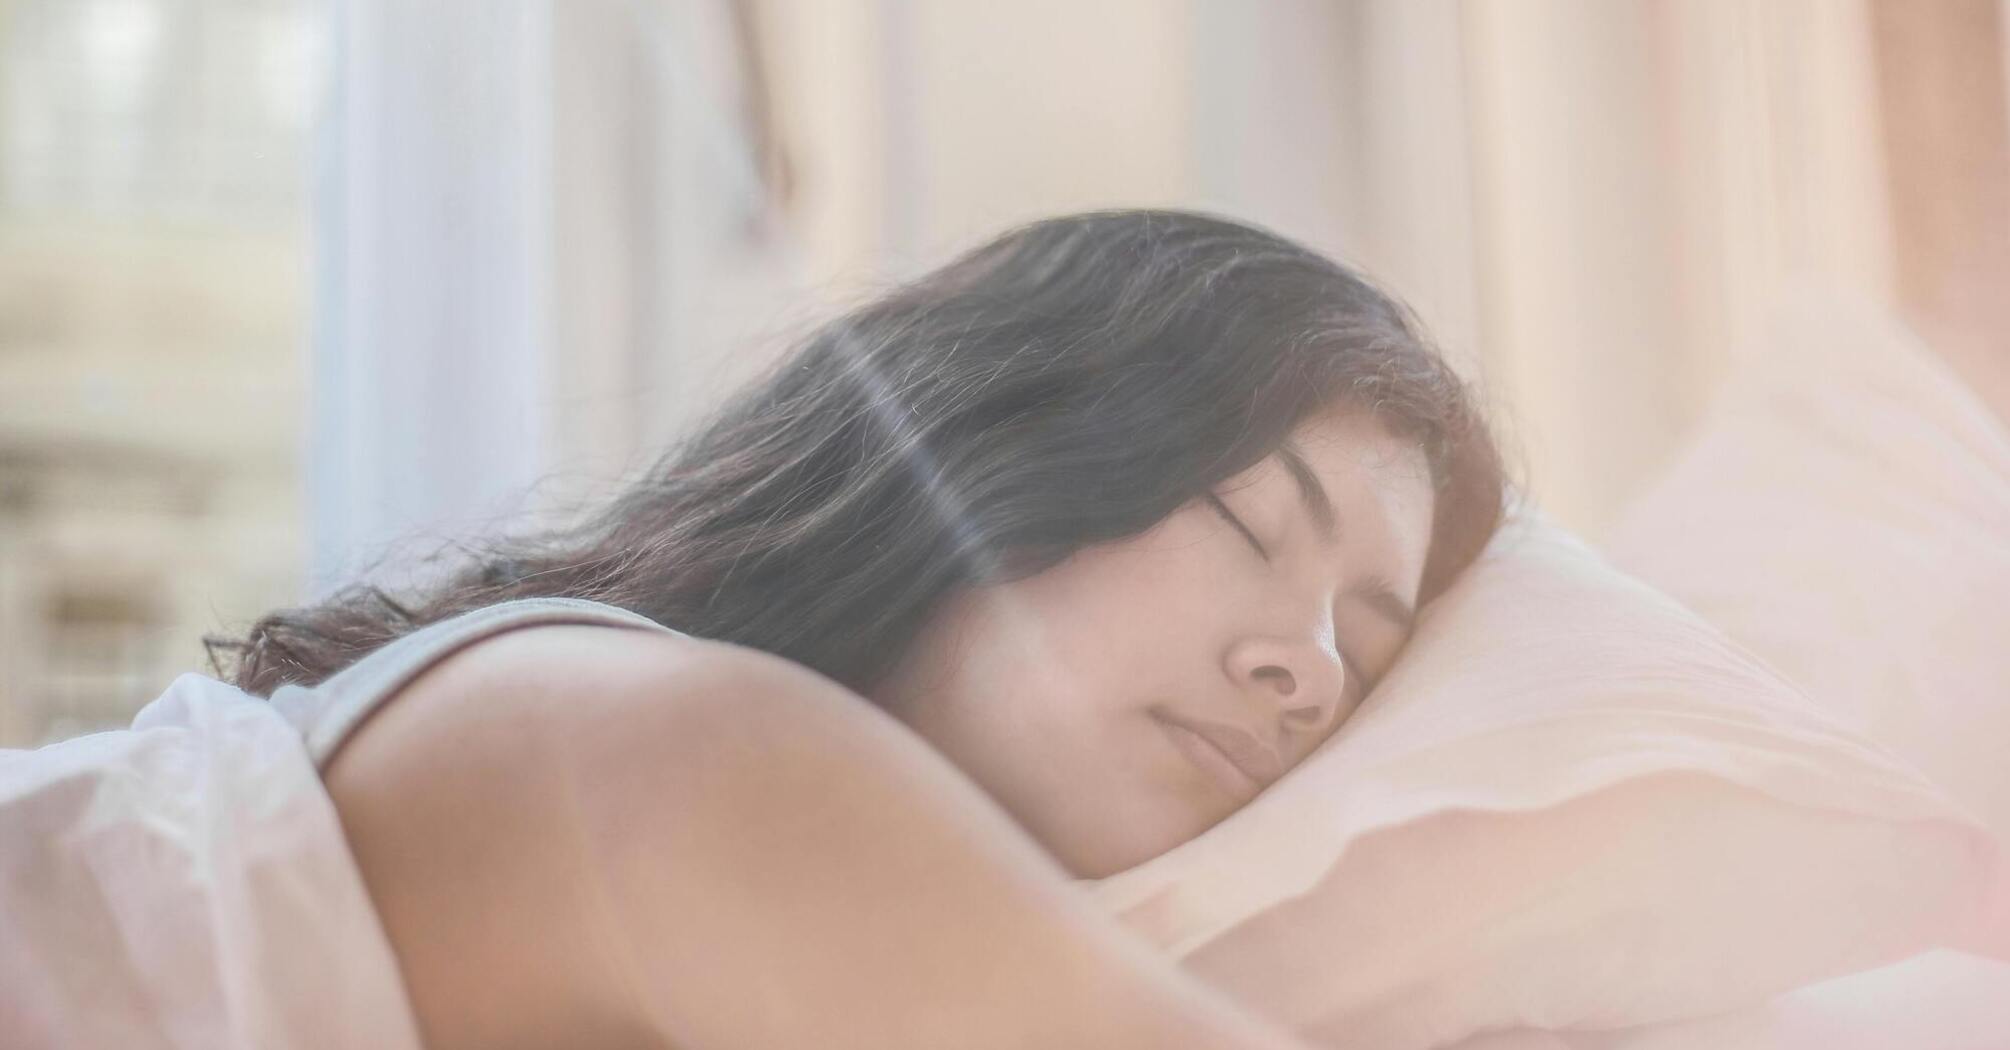 Expert explains why sleeping on your stomach is harmful